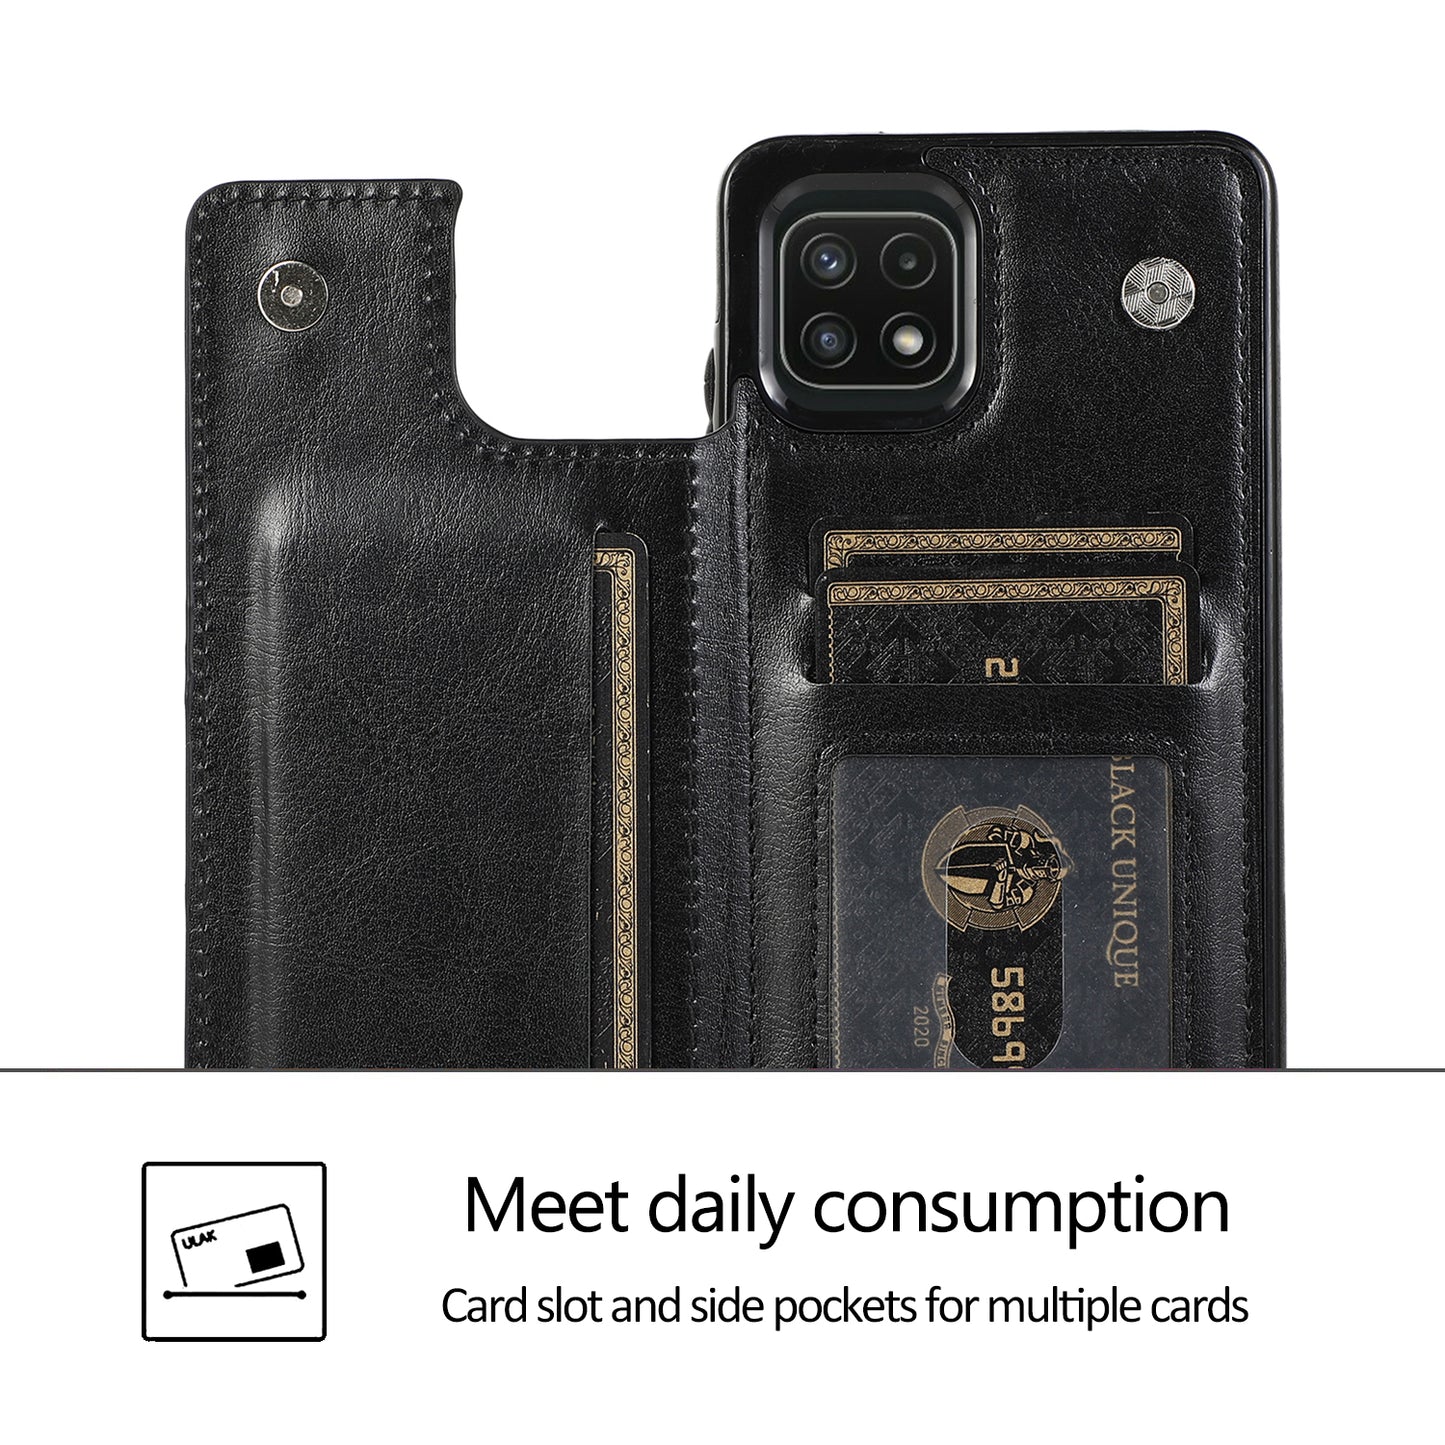 Samsung Galaxy A22 Leather Cover Double Buckles Shock Resistant Multiple Card Slots Magnetic Fold Pocket